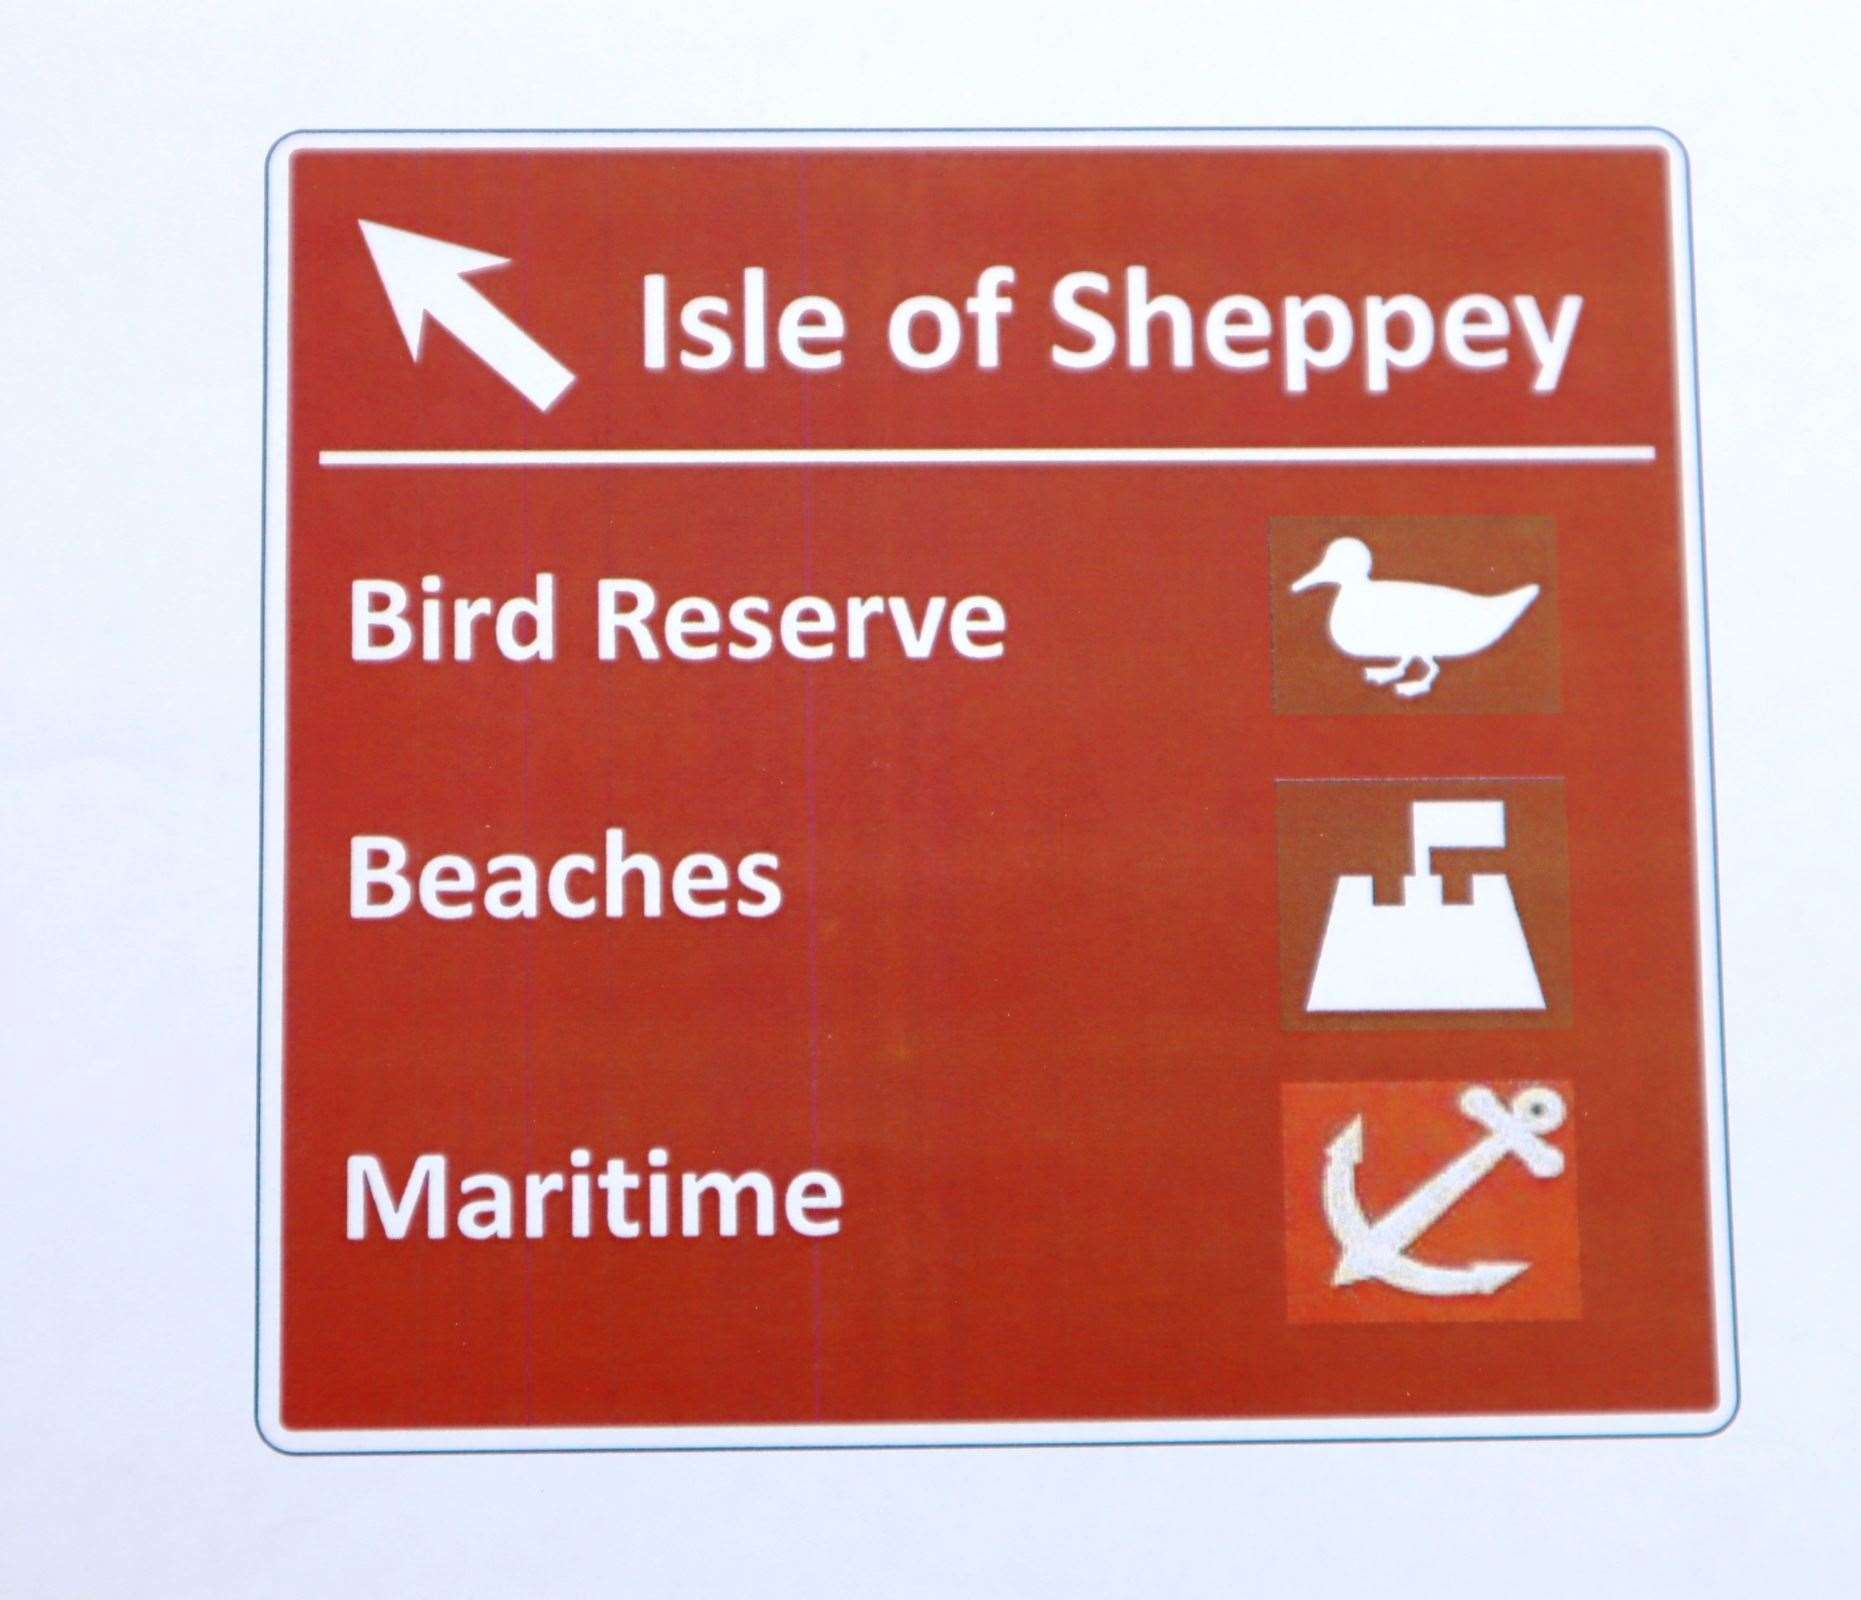 Possible design for a new brown tourism sign for the Isle of Sheppey to be installed on the M2